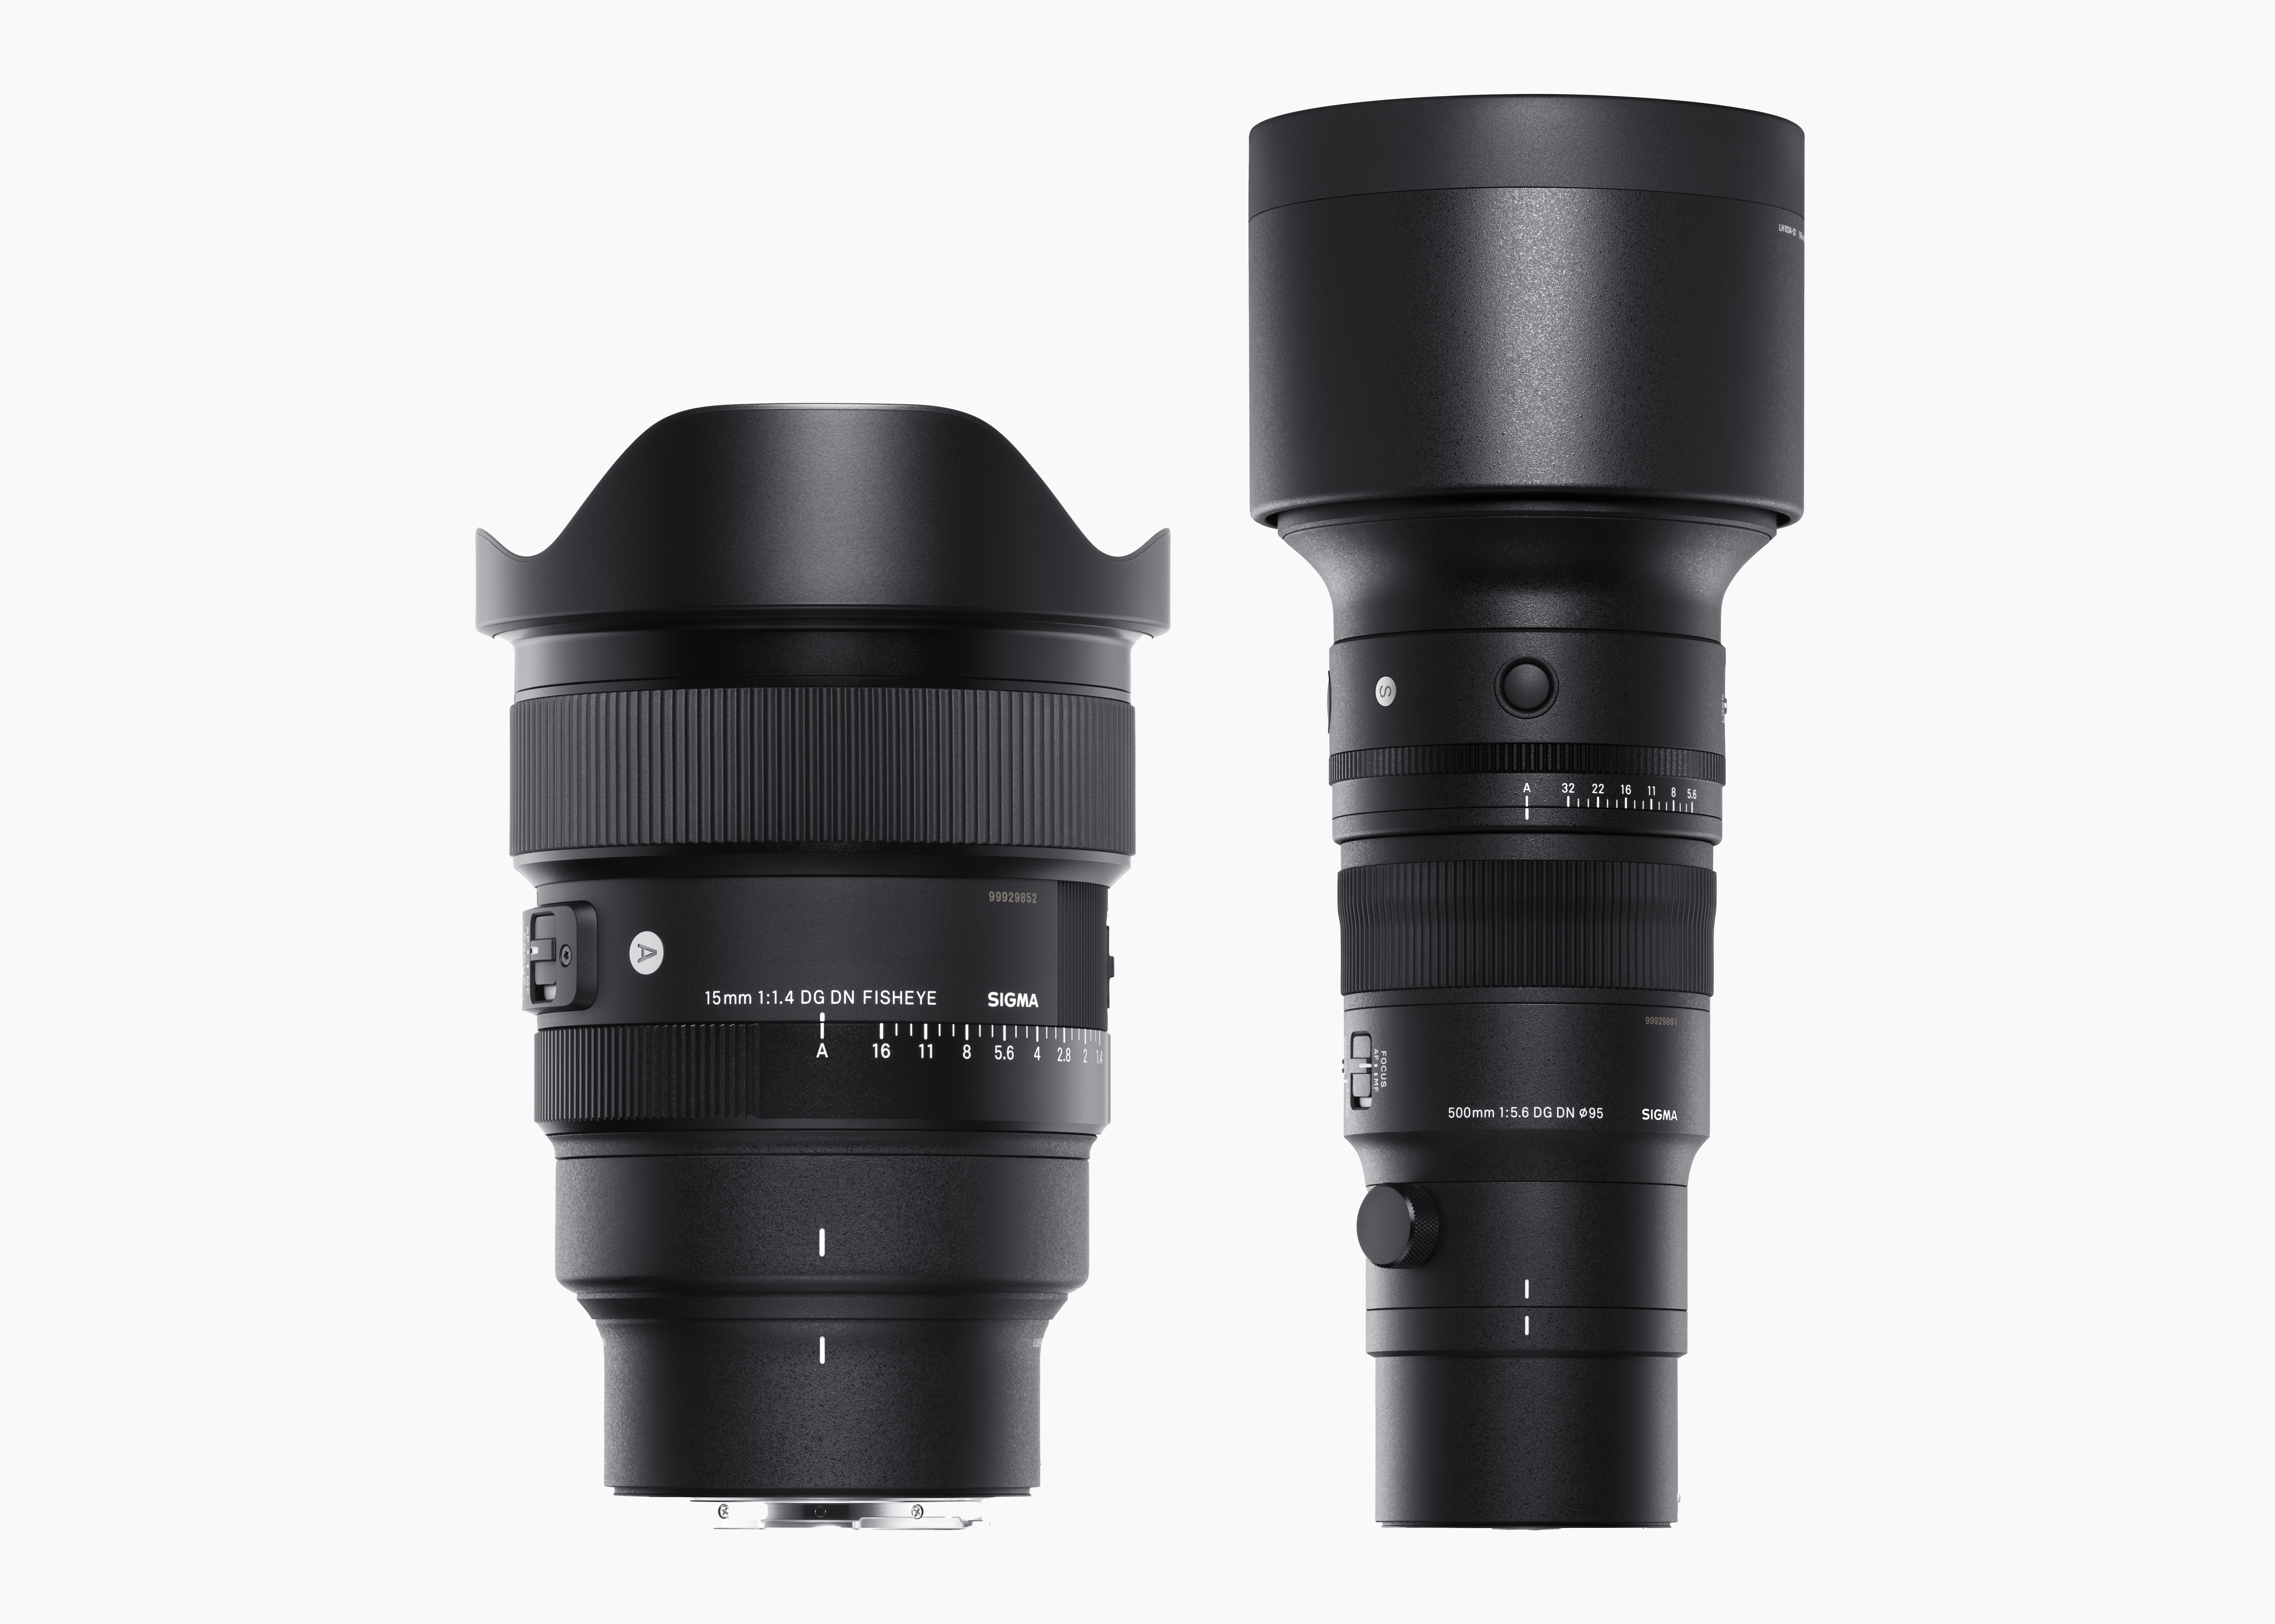 NEW SIGMA 15mm F1.4 DG DN and SIGMA 500mm F5.6 16